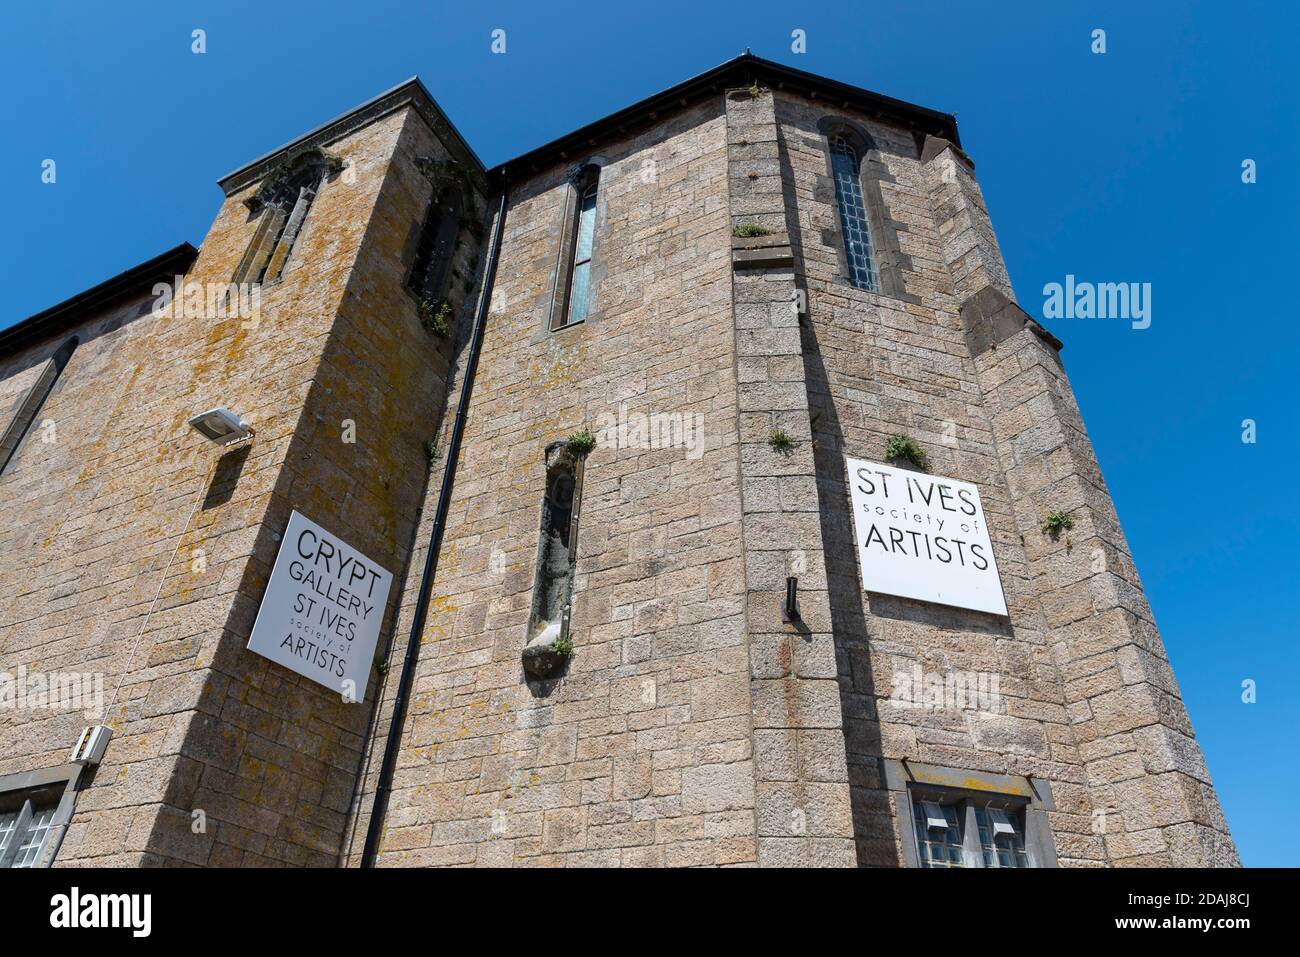 The Old Mariners Church. St Ives Society of Artists and Crypt Gallery, Norway Square, St Ives, Cornwall, UK Stock Photo